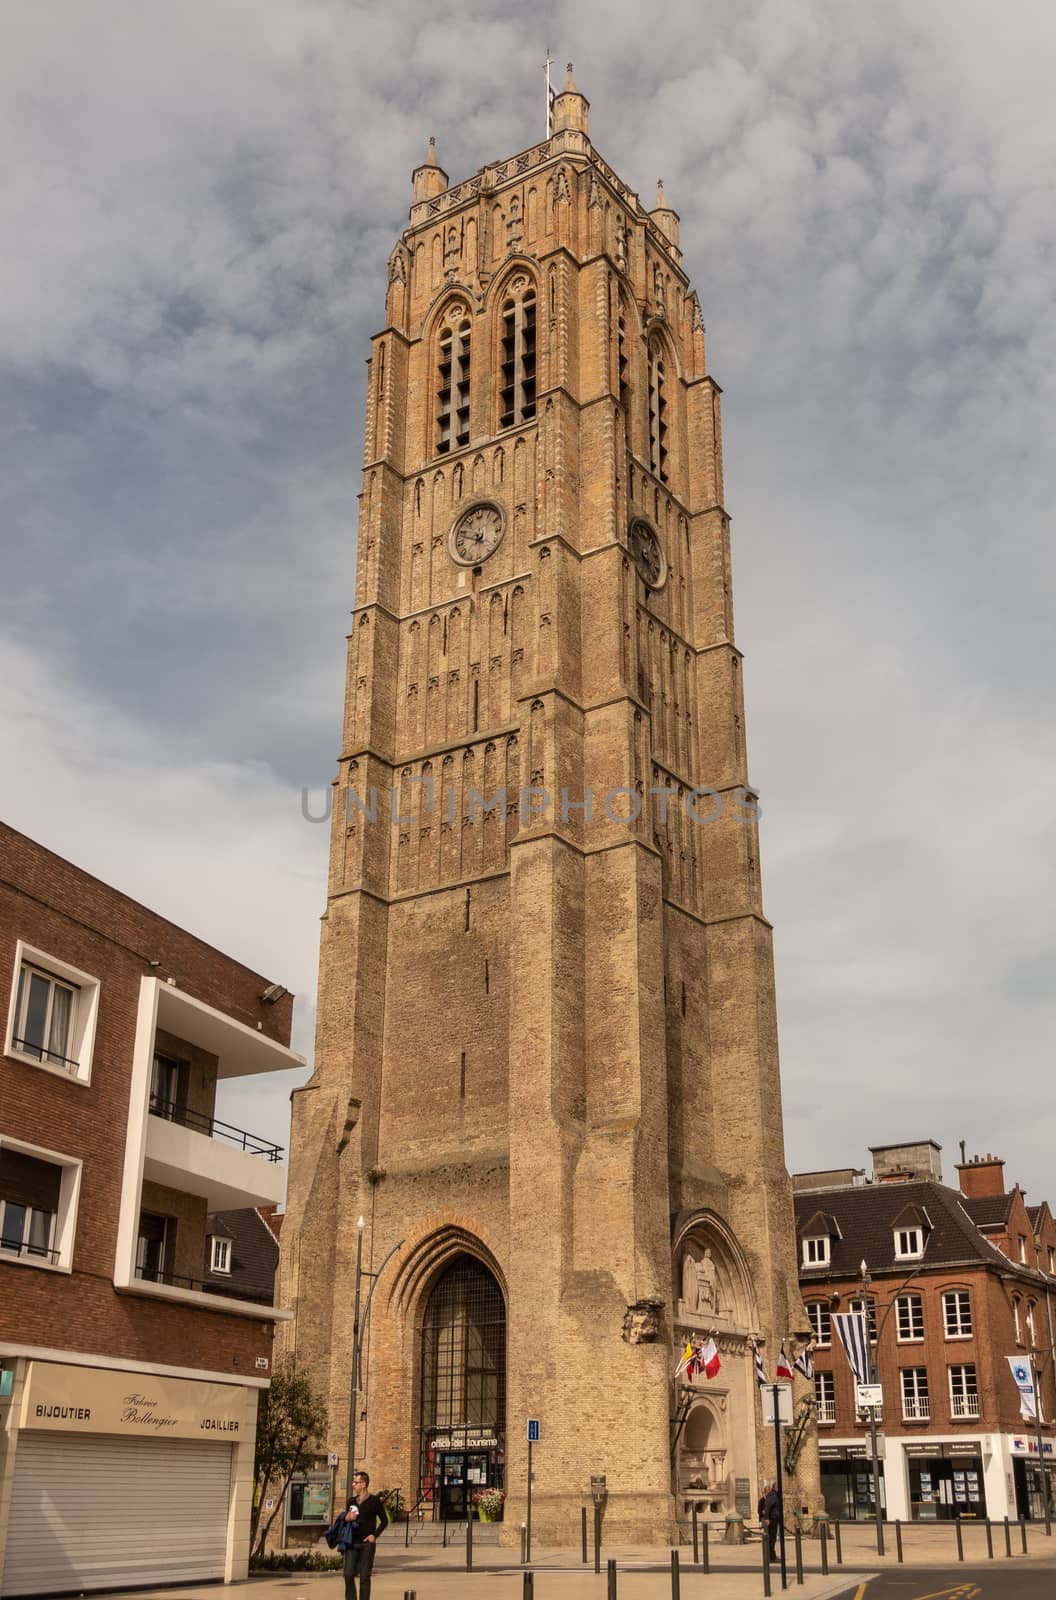 Dunkerque, France - September 16, 2018: the brown brick Belfry of Dunkirk towers over houses under cloudy blue sky. Street scene with people.